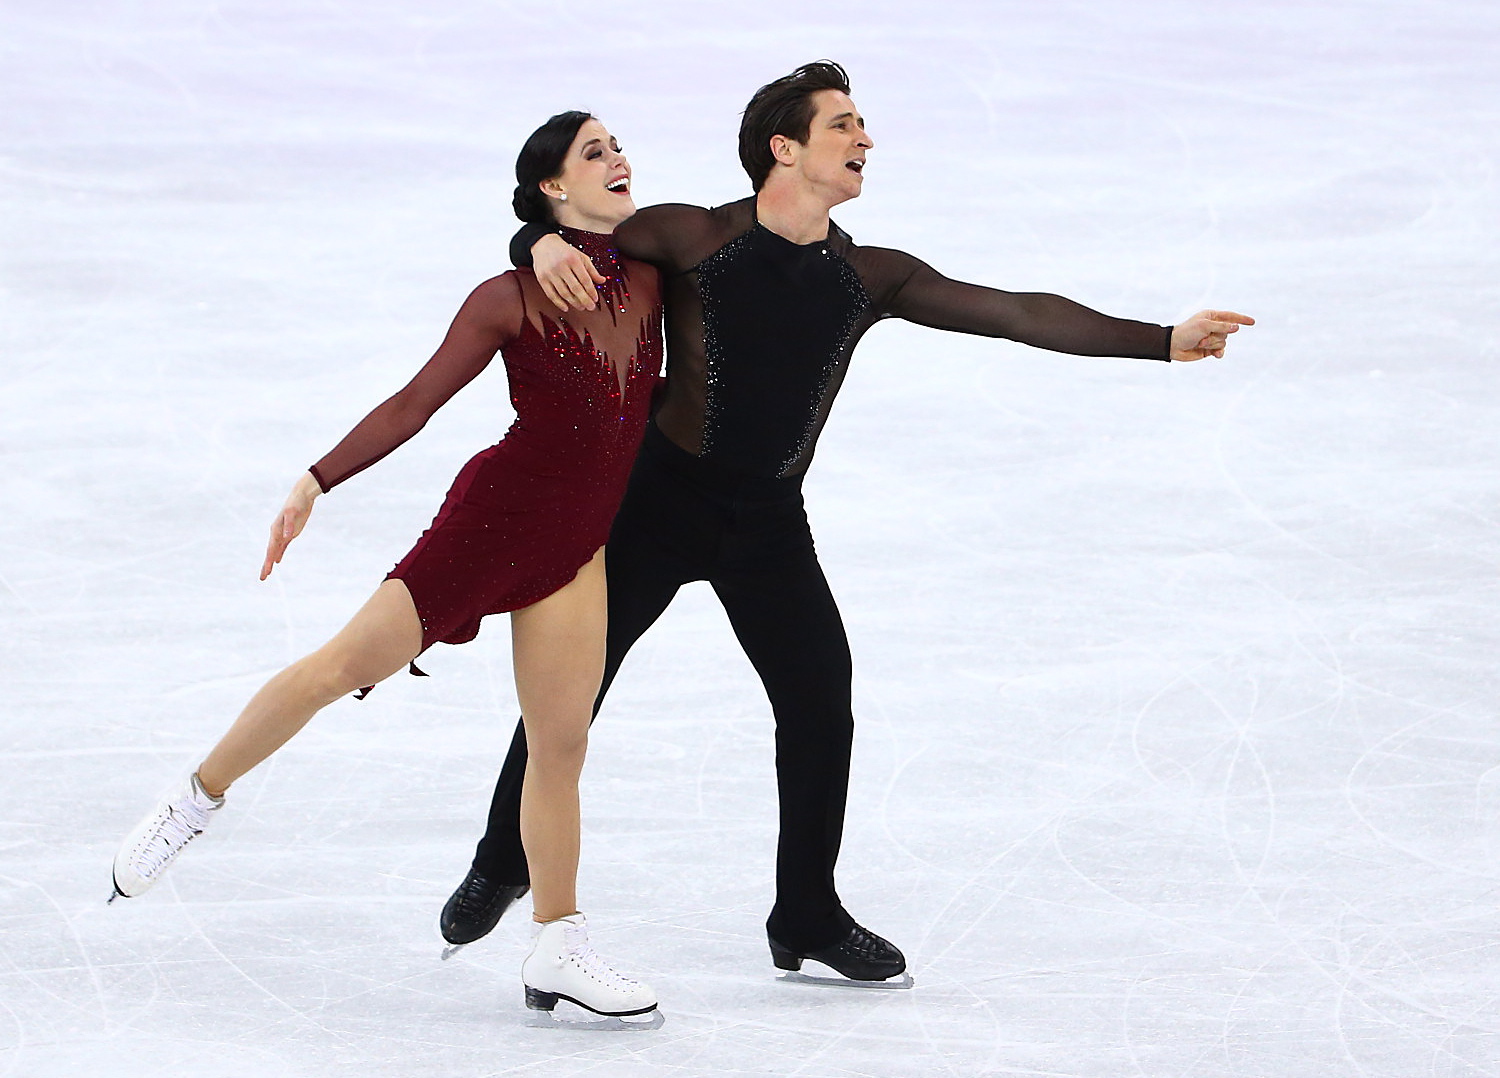 Tessa Virtue and Scott Moir skating during their gold medal Olympic performance.